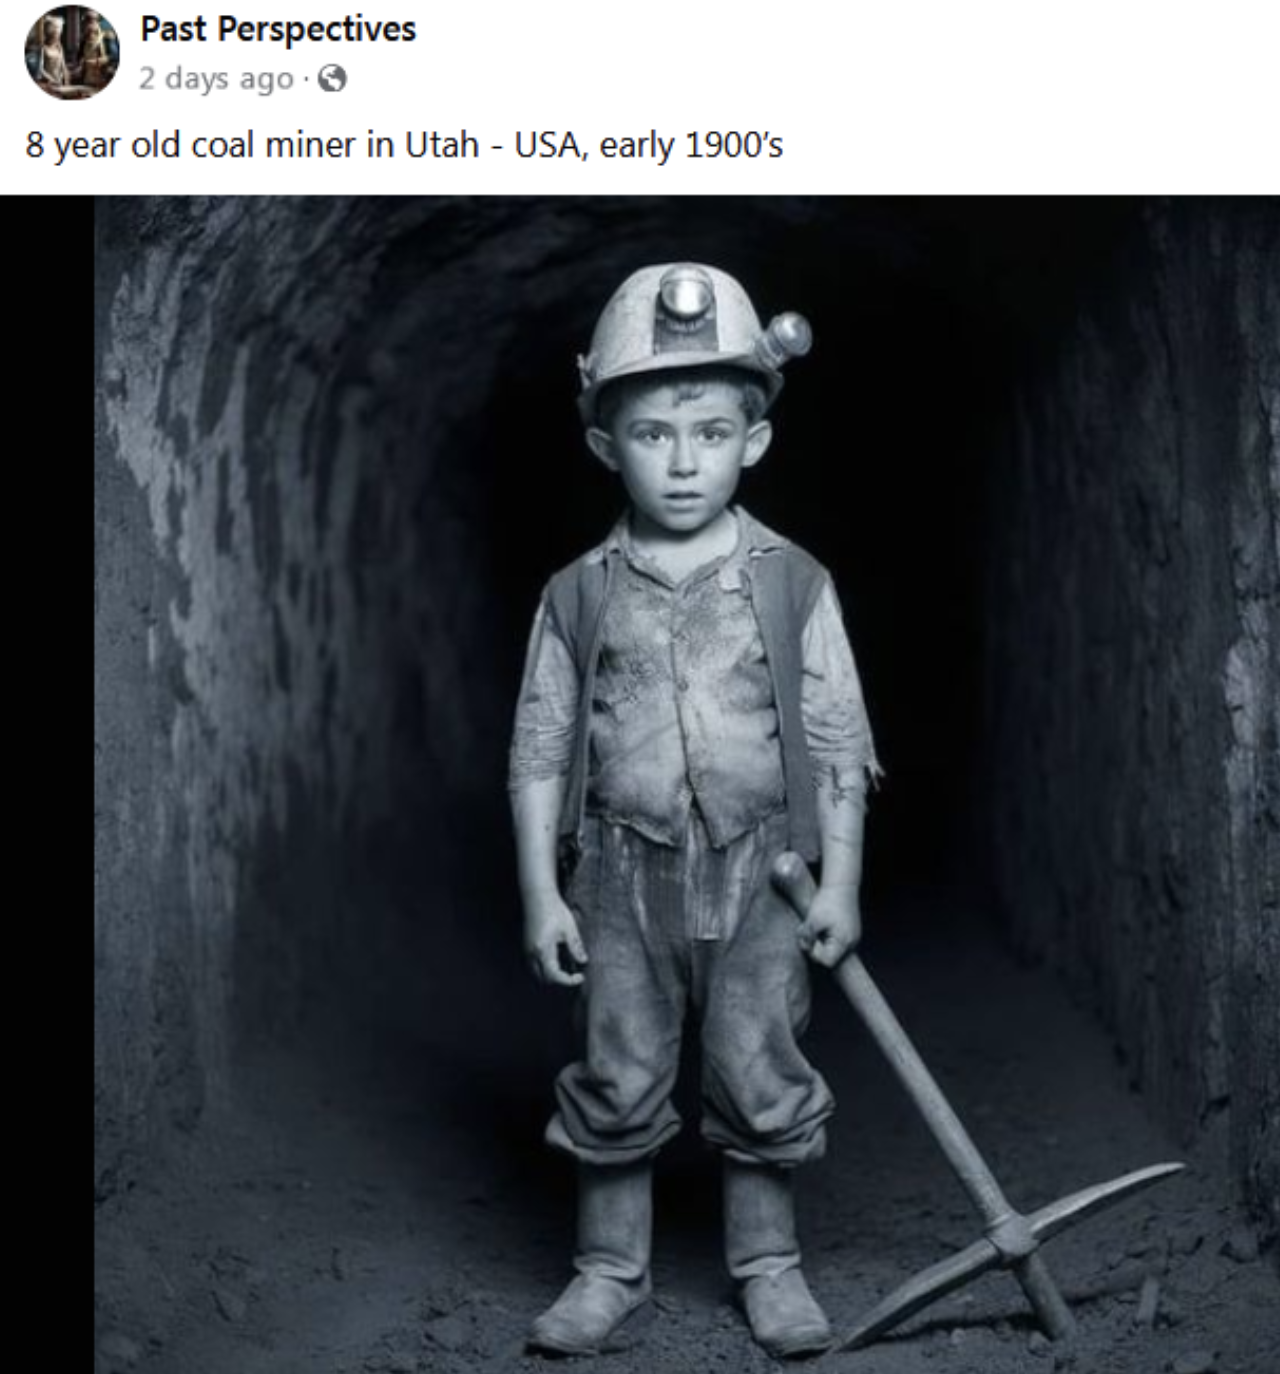 standing - Past Perspectives 2 days ago 8 year old coal miner in Utah Usa, early 1900's